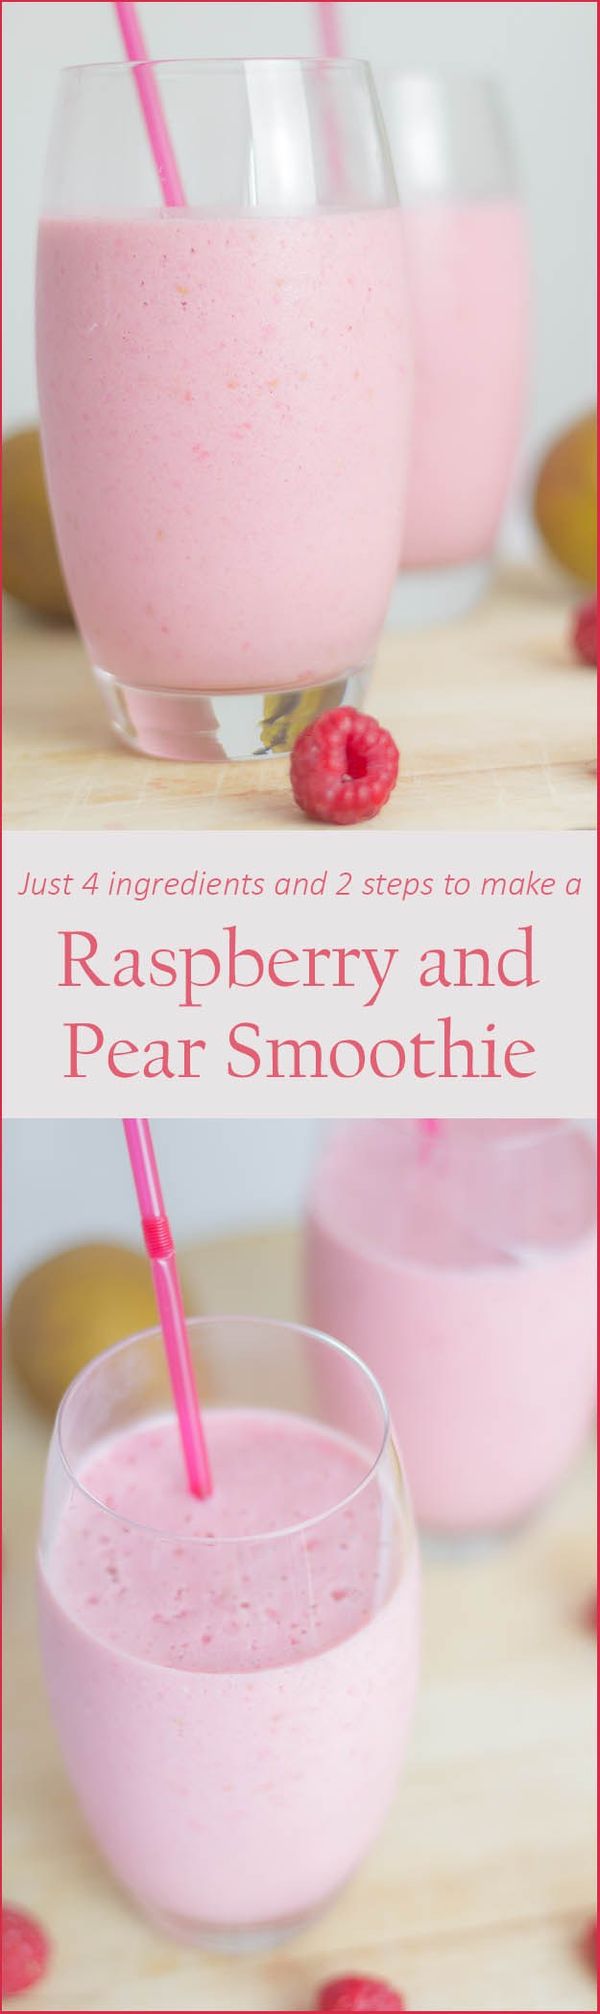 Raspberry and Pear Smoothie